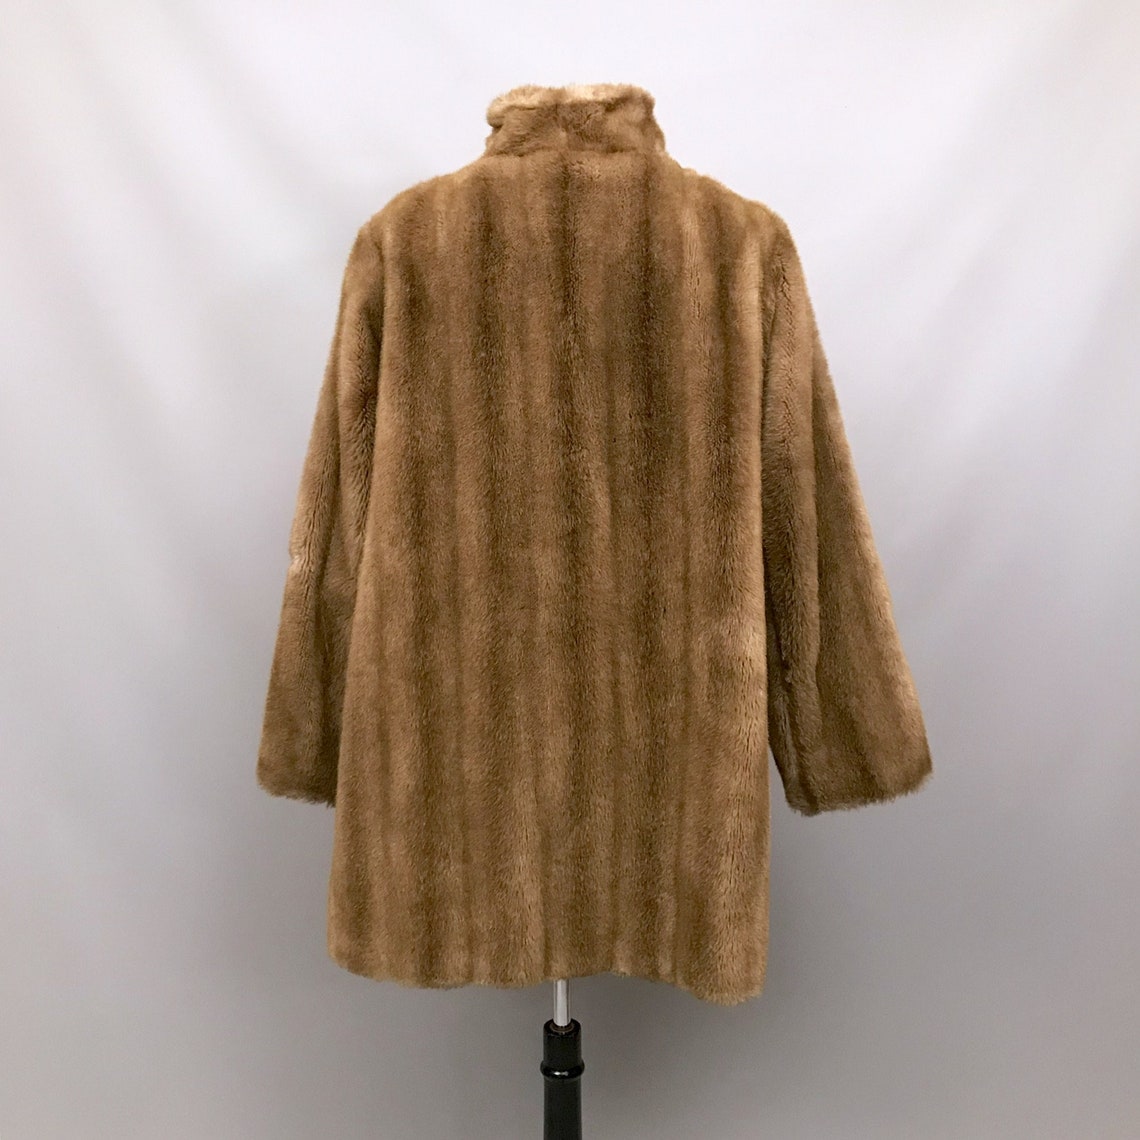 1960s Faux Fur Coat by Astraka Made in England - Etsy UK